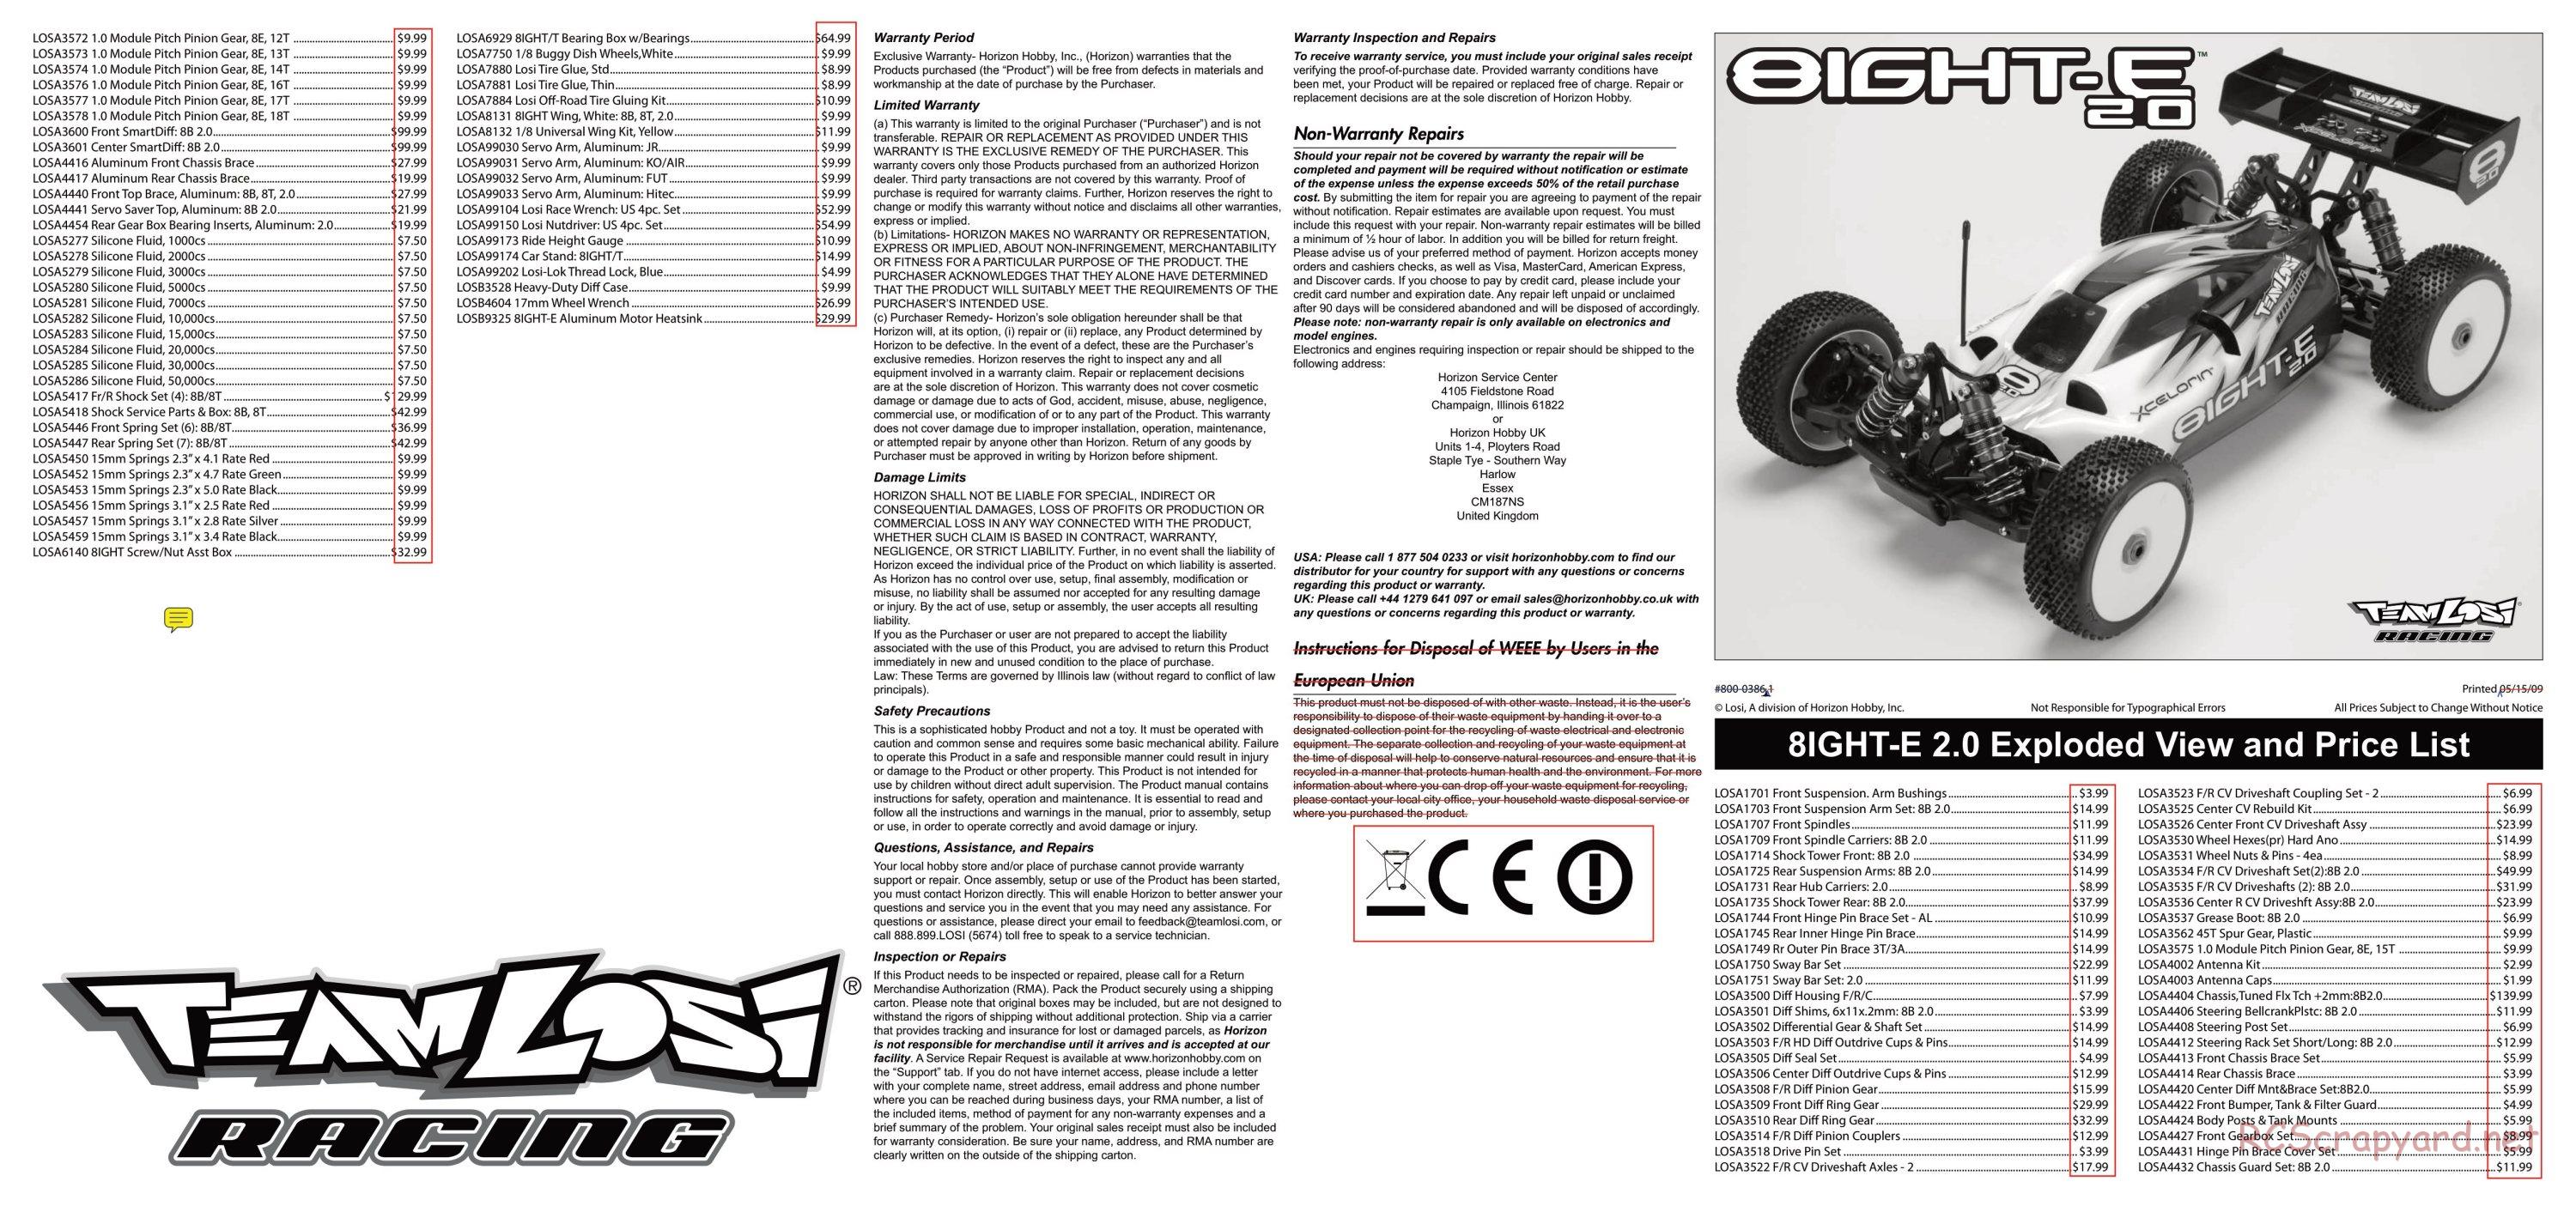 Team Losi - 8ight-E 2.0 Race Roller - Parts List and Exploded View - Page 2